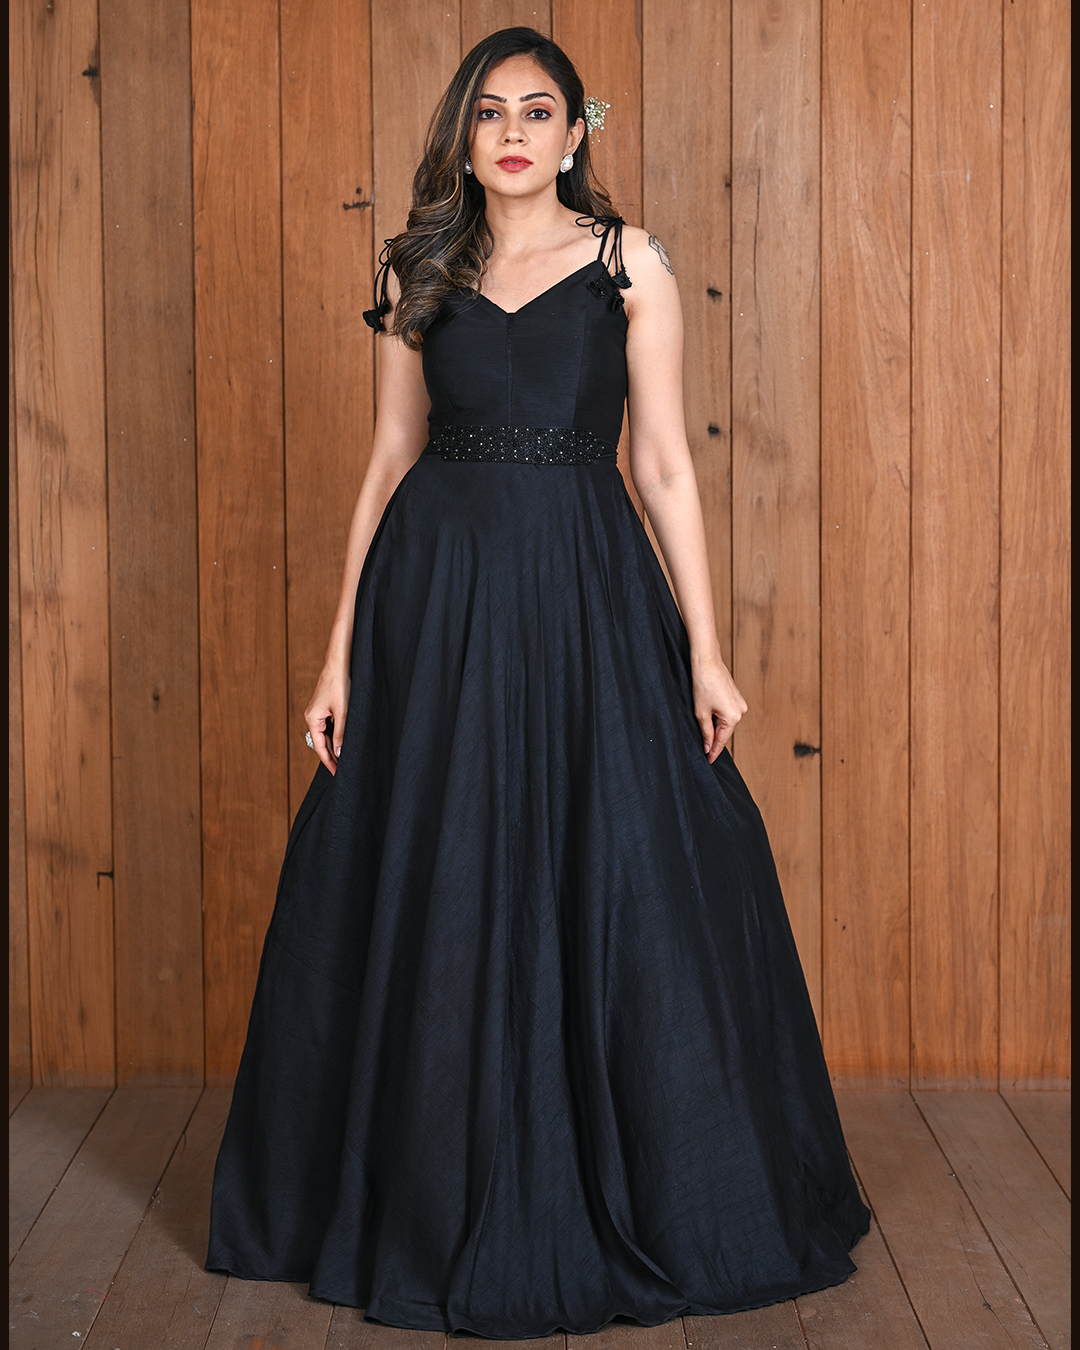 Buy Wabi SABI - Black Gown Western Gown for Girl/Women/Ladies (Corsica Gown)  XL at Amazon.in